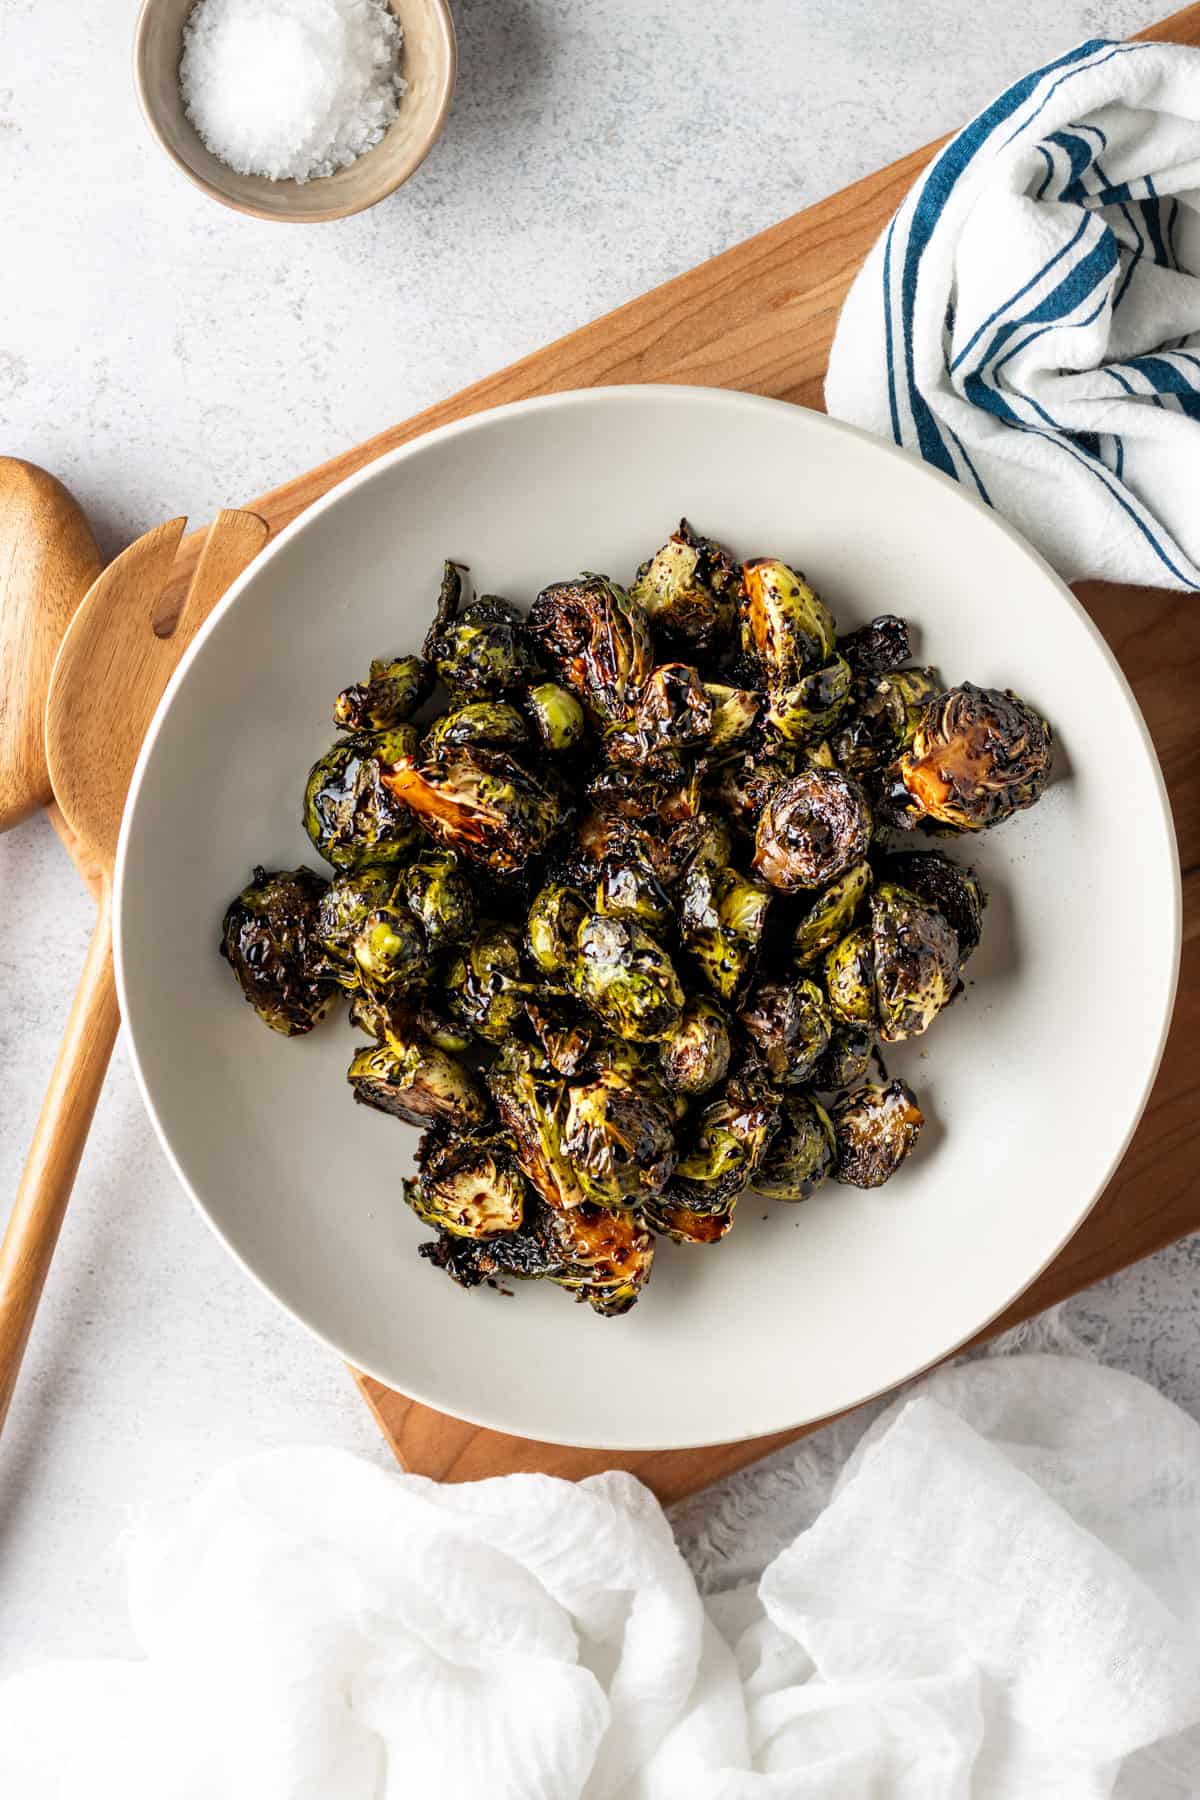 Brussels sprouts in a while bowl on a wooden cutting board tossed with raspberry balsamic glaze.